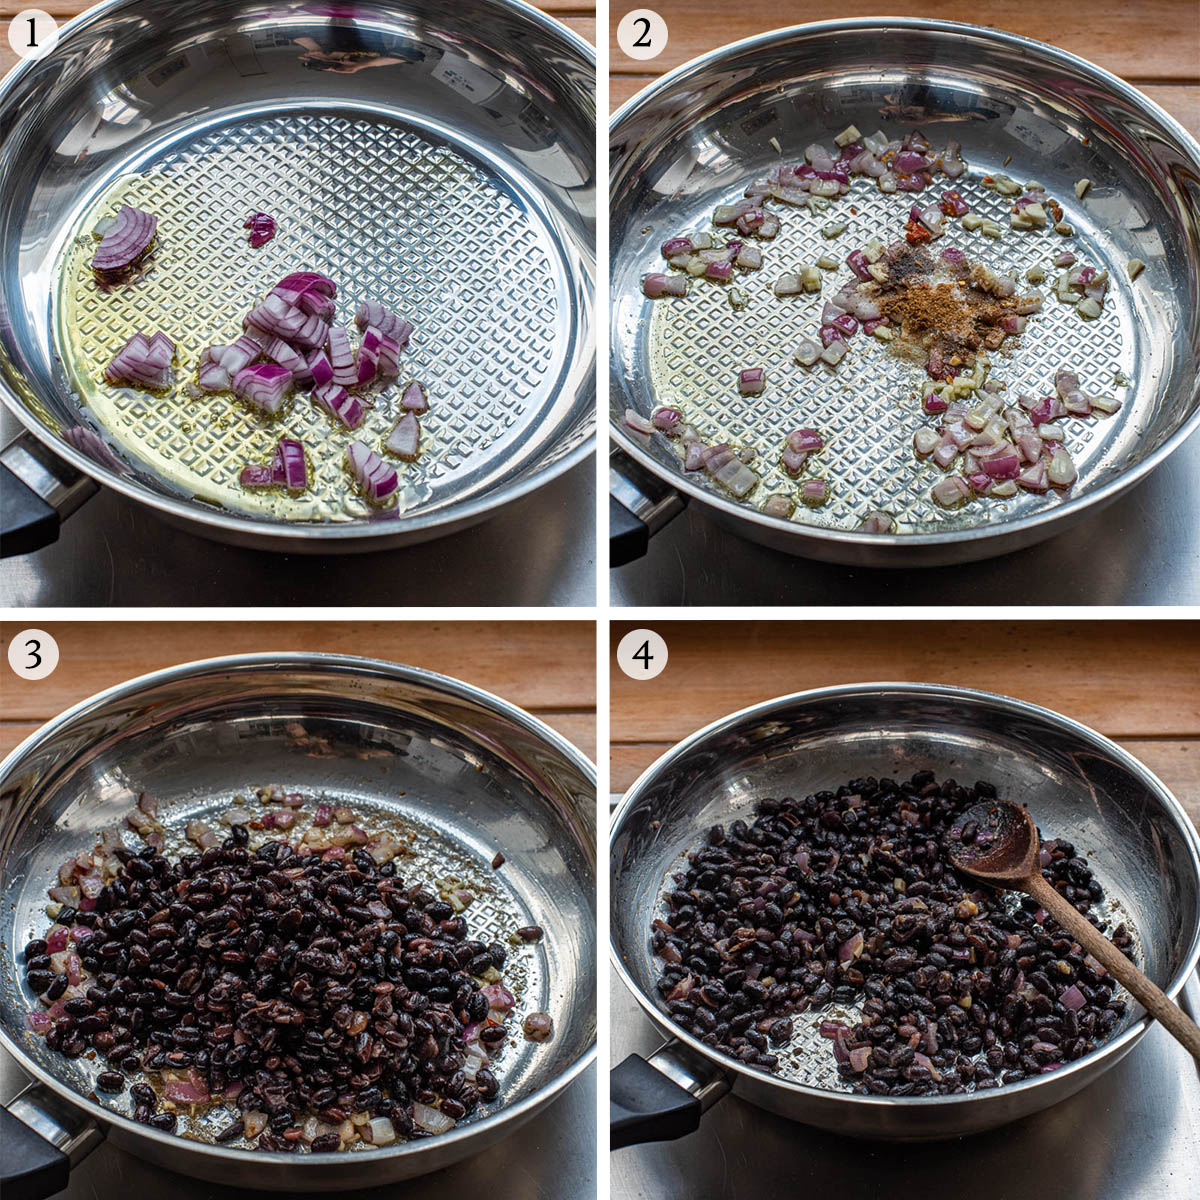 Spiced black beans steps 1 to 4.